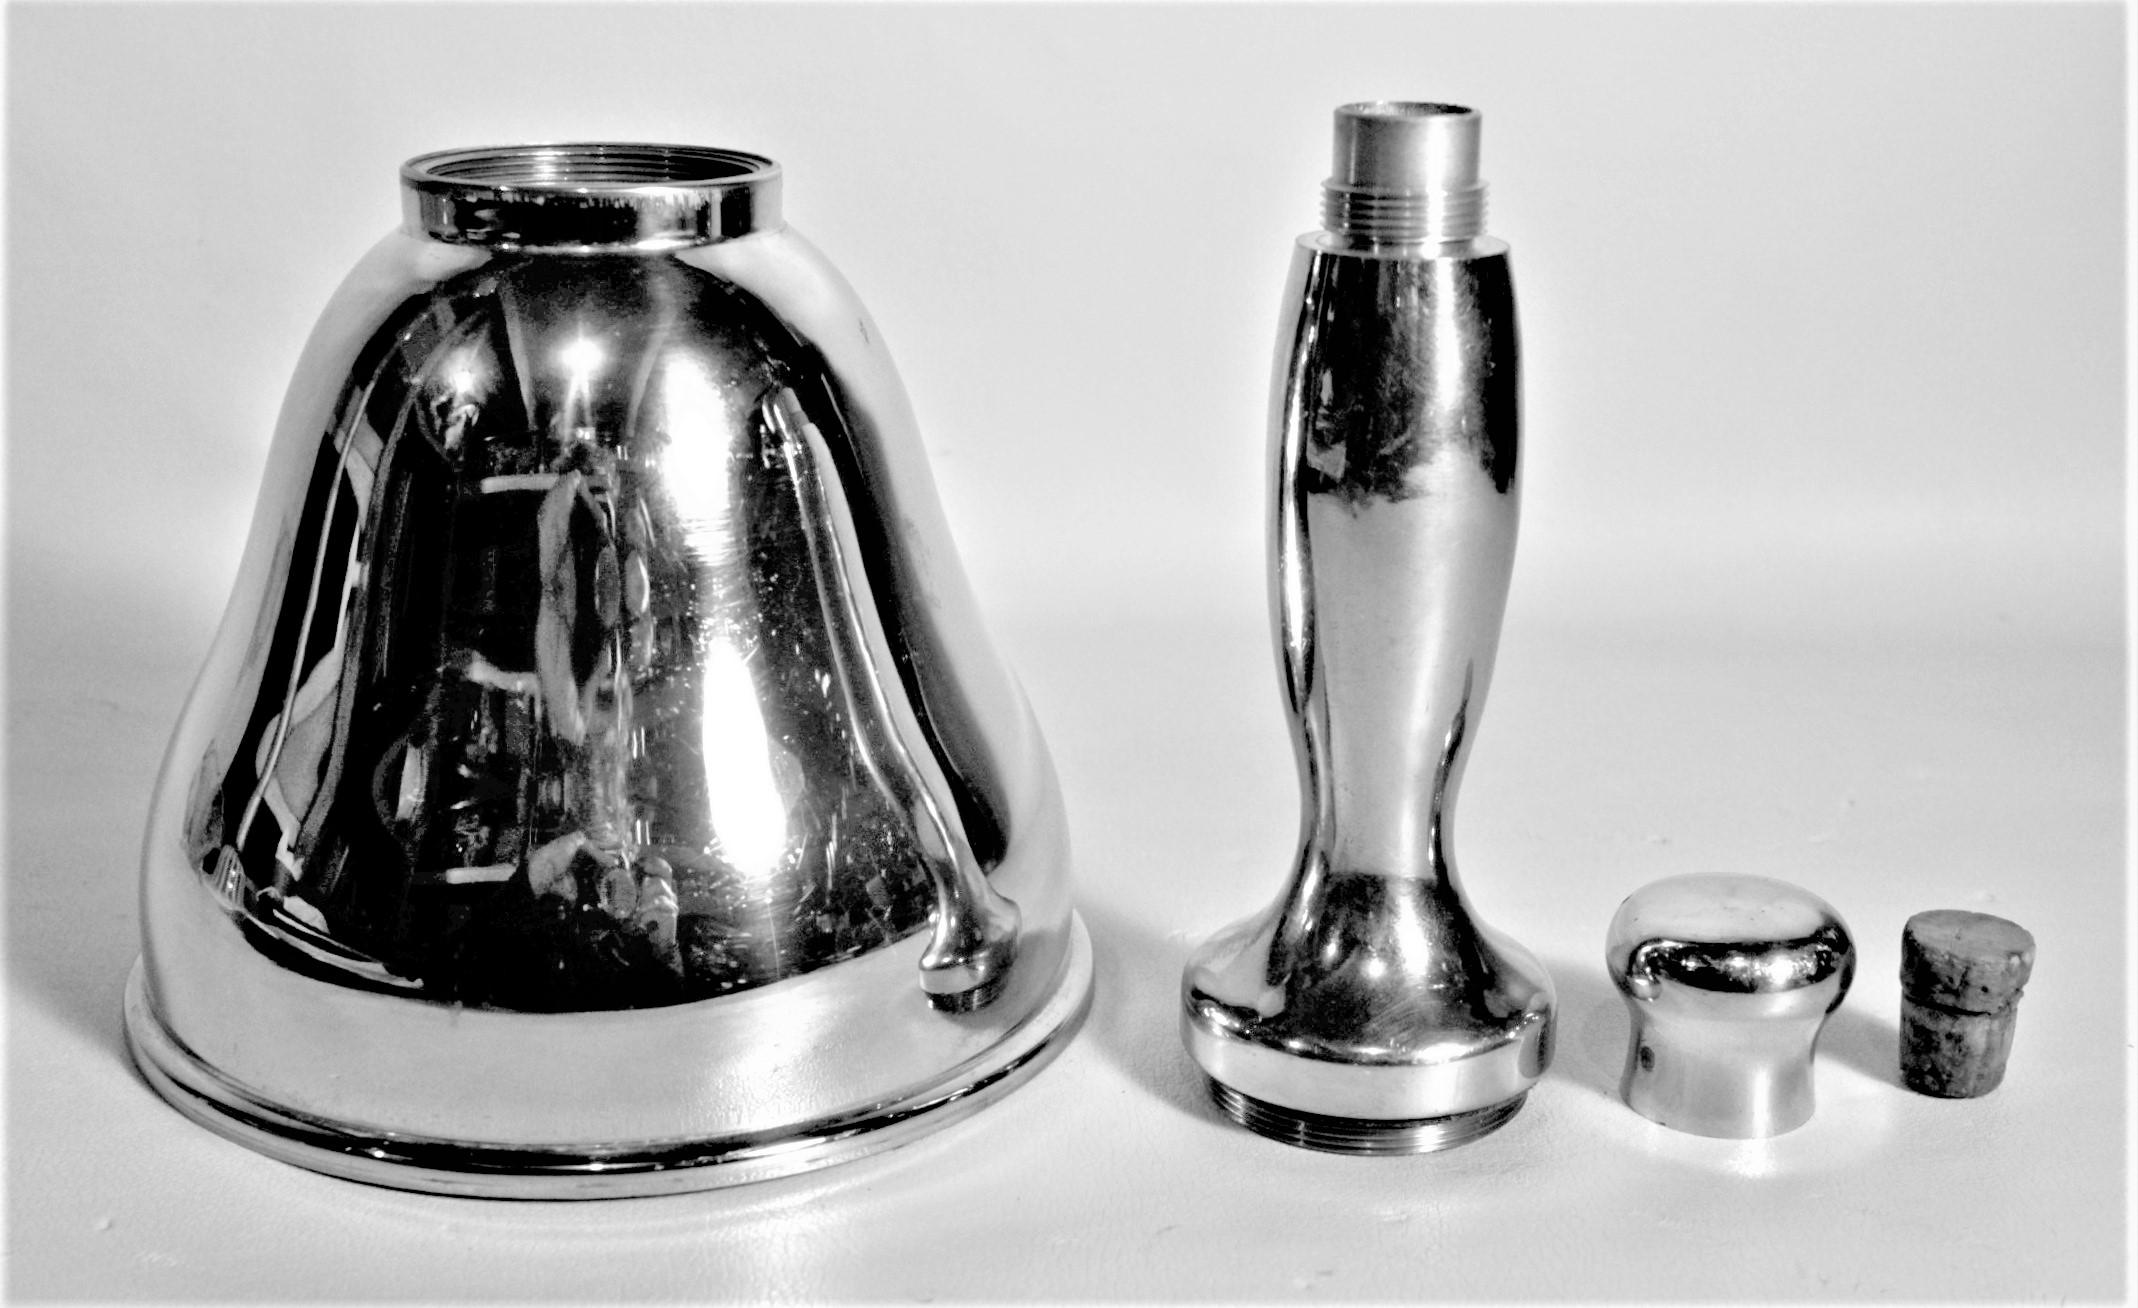 Antique Silver Plated Hand Held School Bell Shaped Cocktail or Bar Shaker In Good Condition For Sale In Hamilton, Ontario